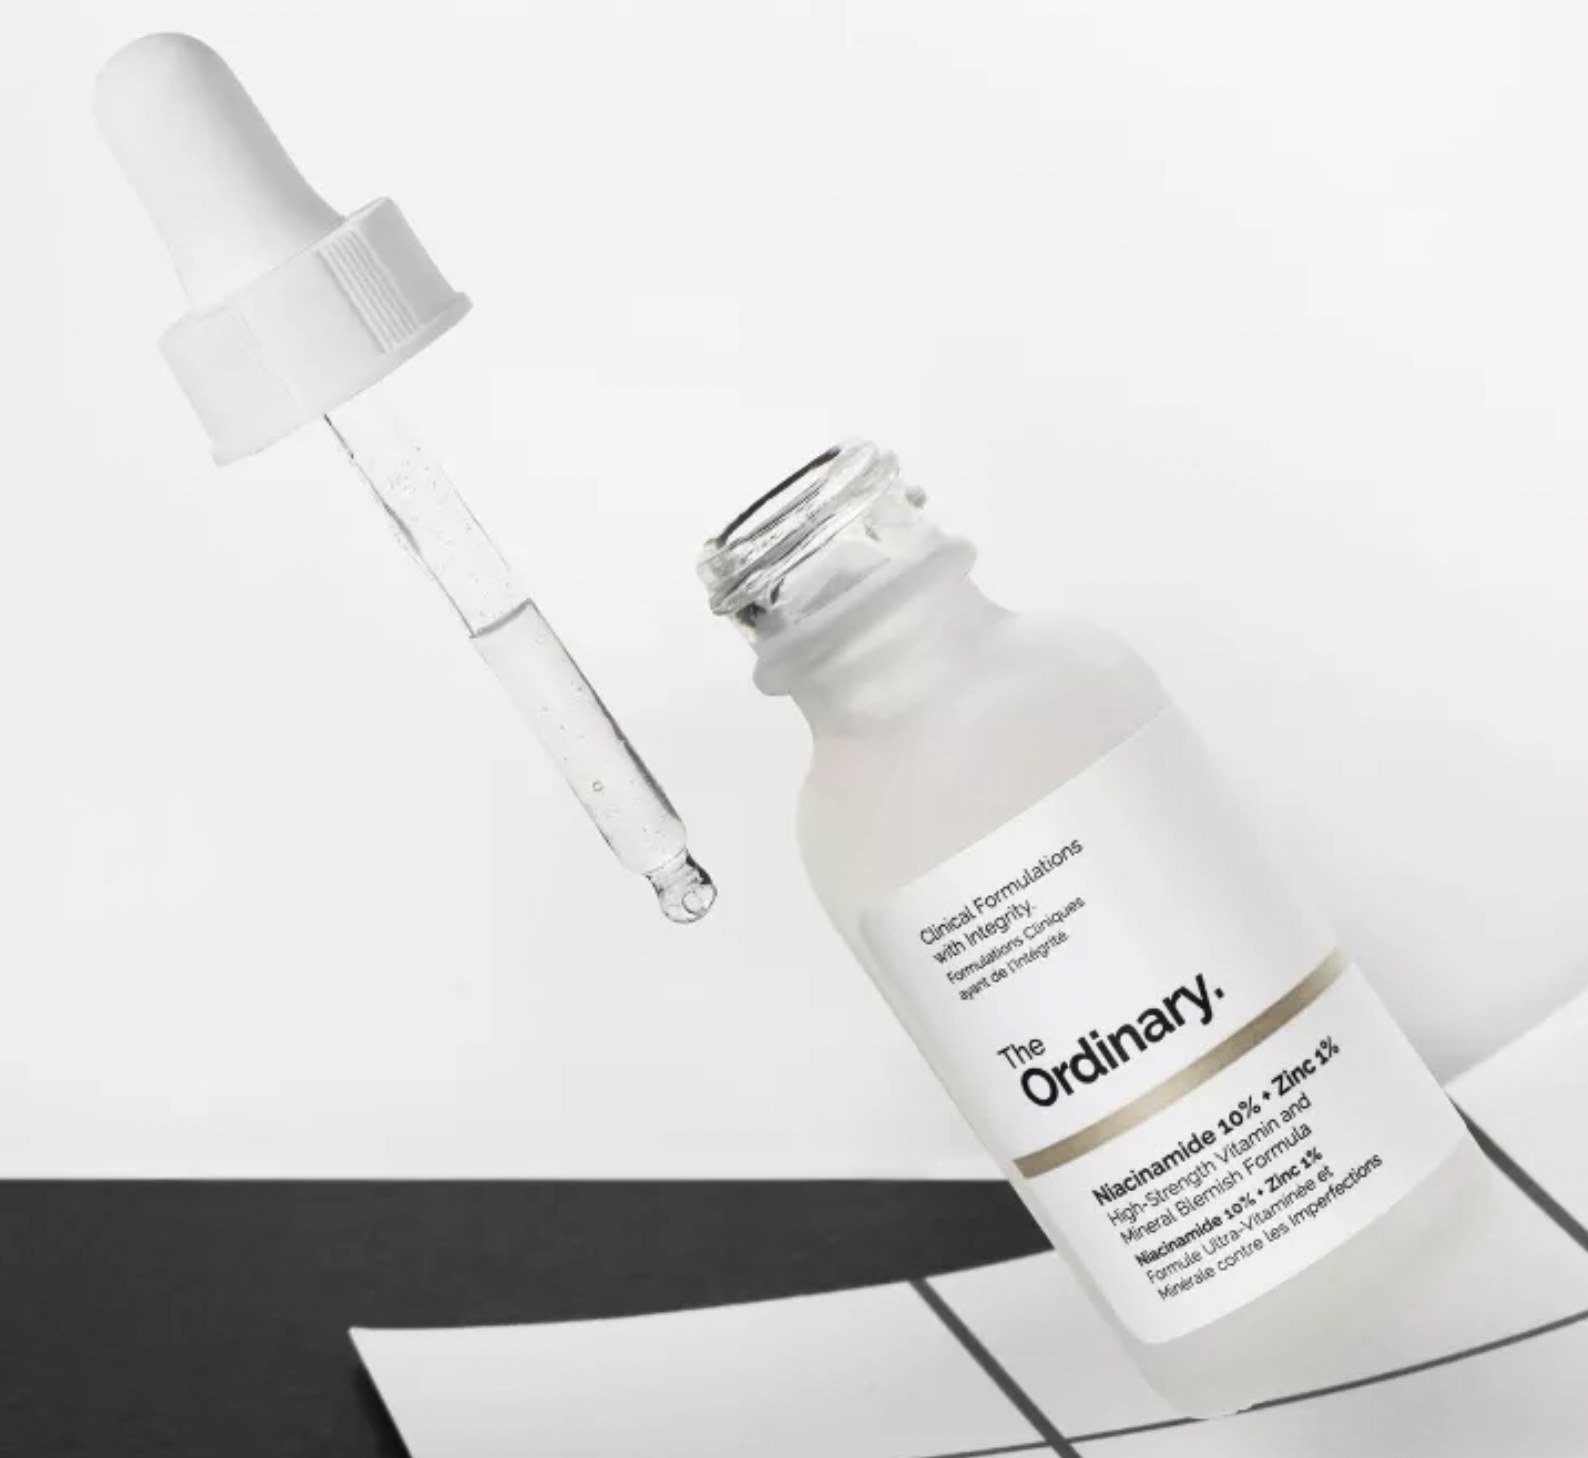 the serum in its packaging next to its dropper